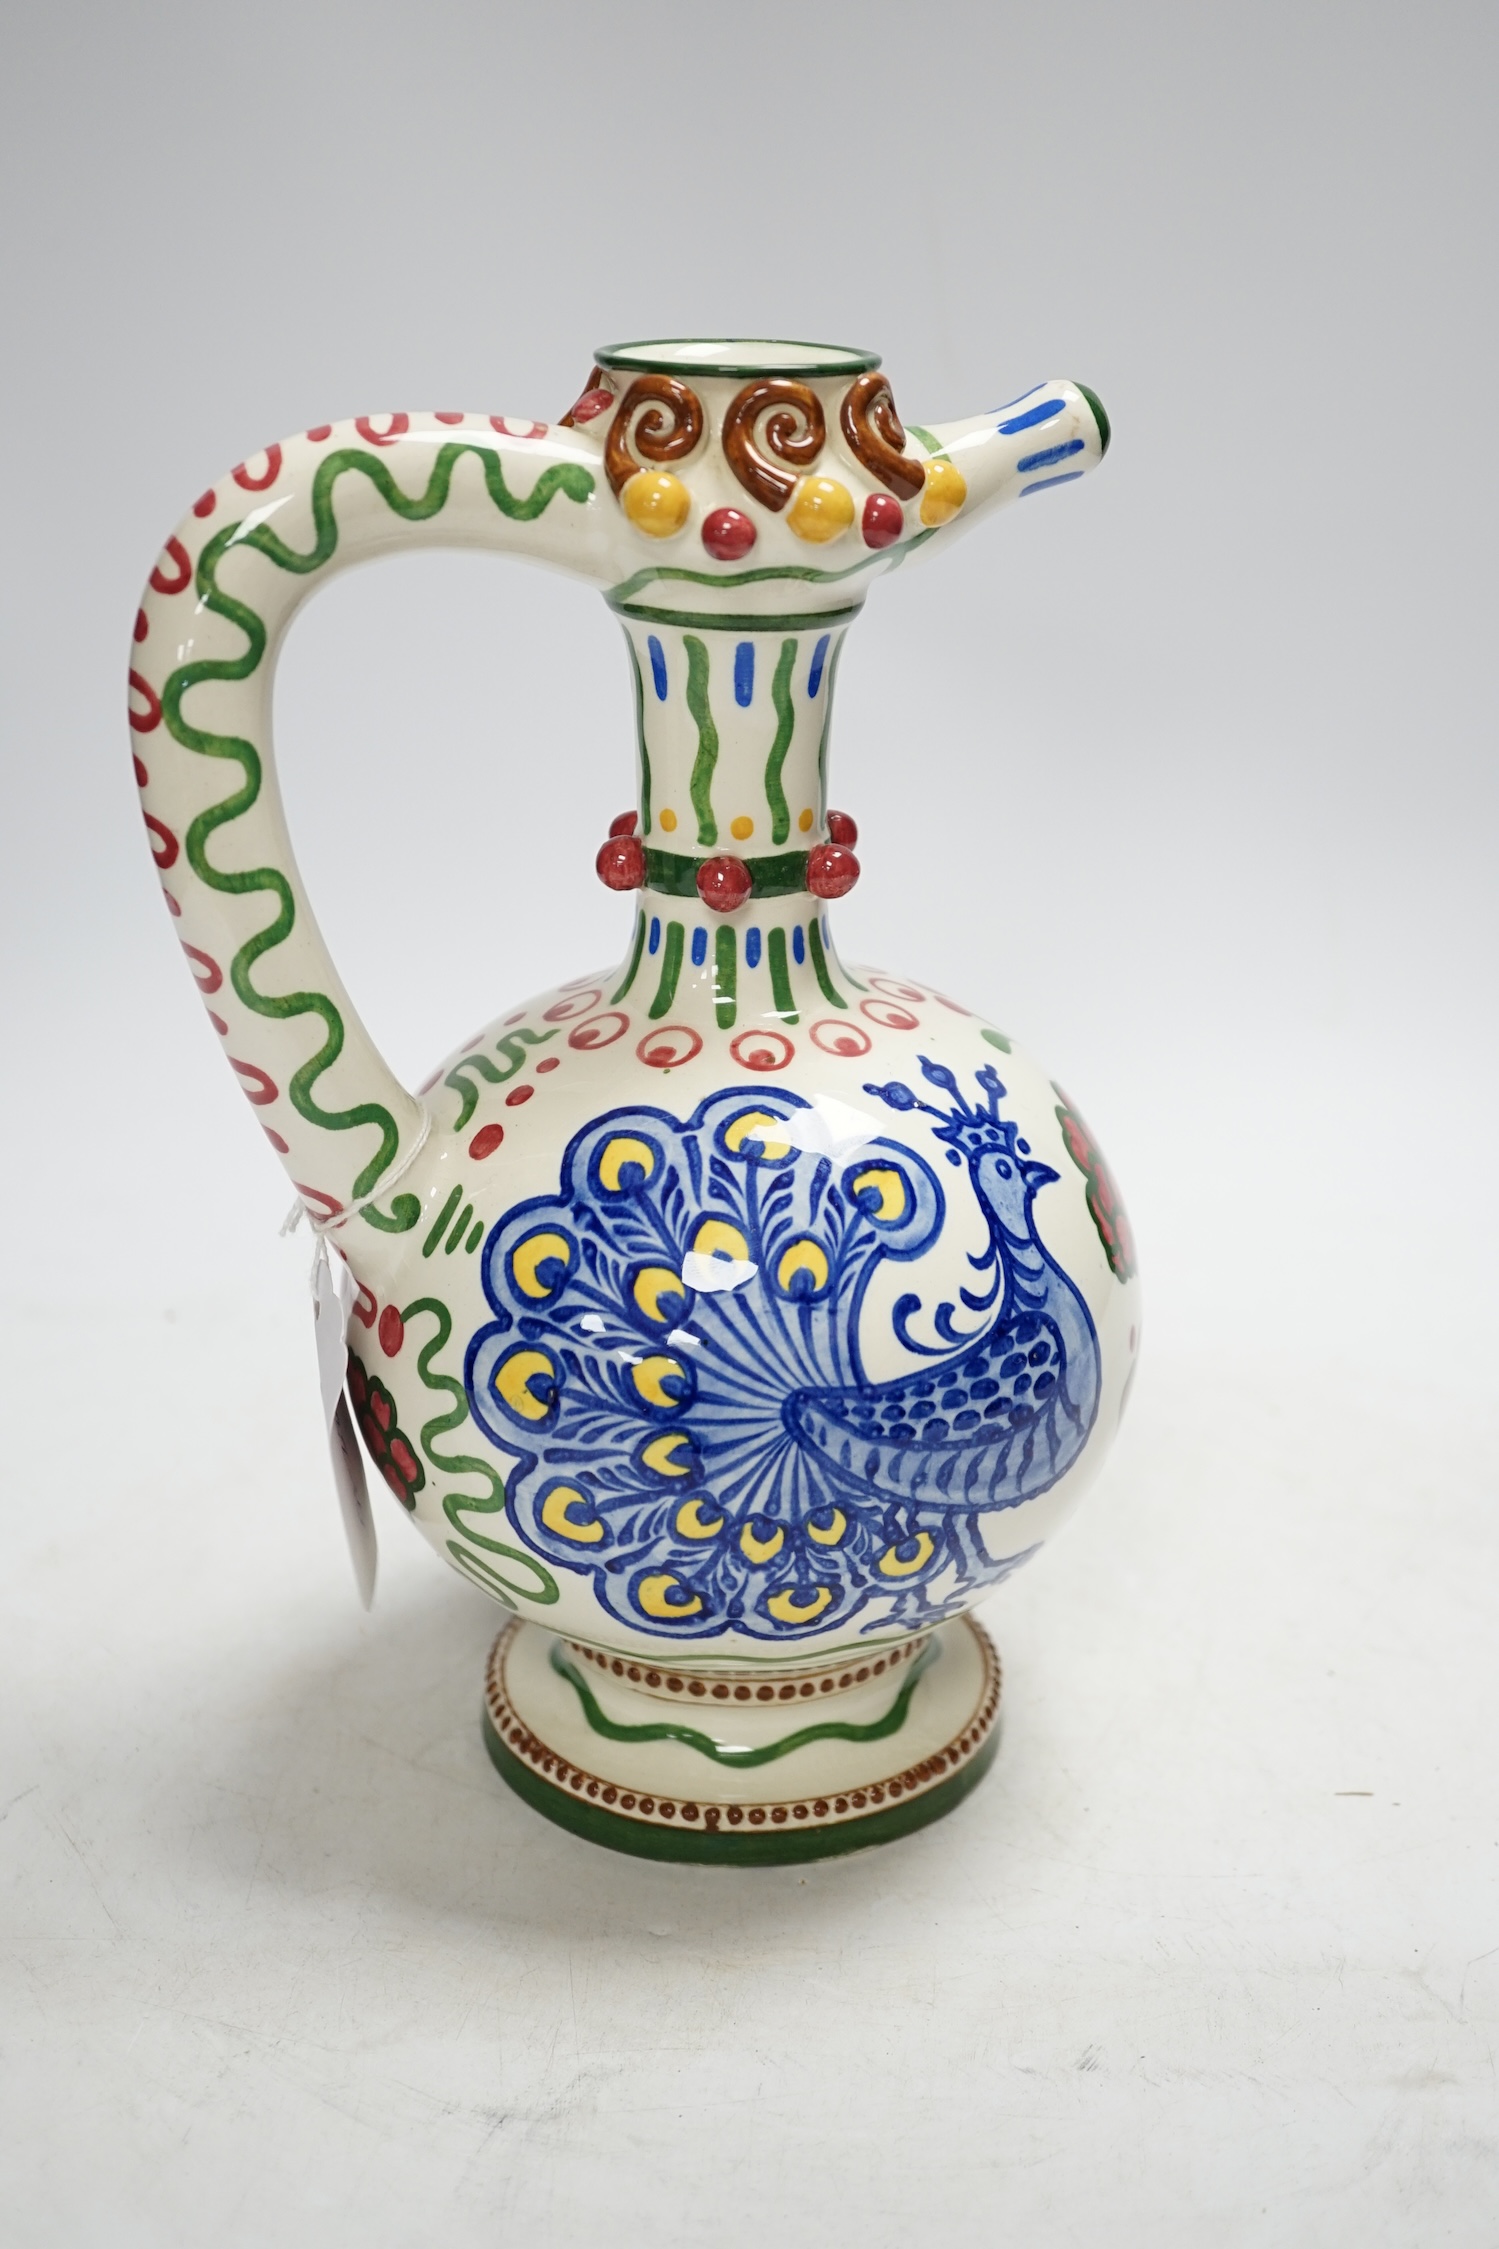 A Zsolnay jug or ewer decorated with peacocks and flowers, stamped ‘Zsolnay 830 and 07’ to the base, - Image 3 of 4